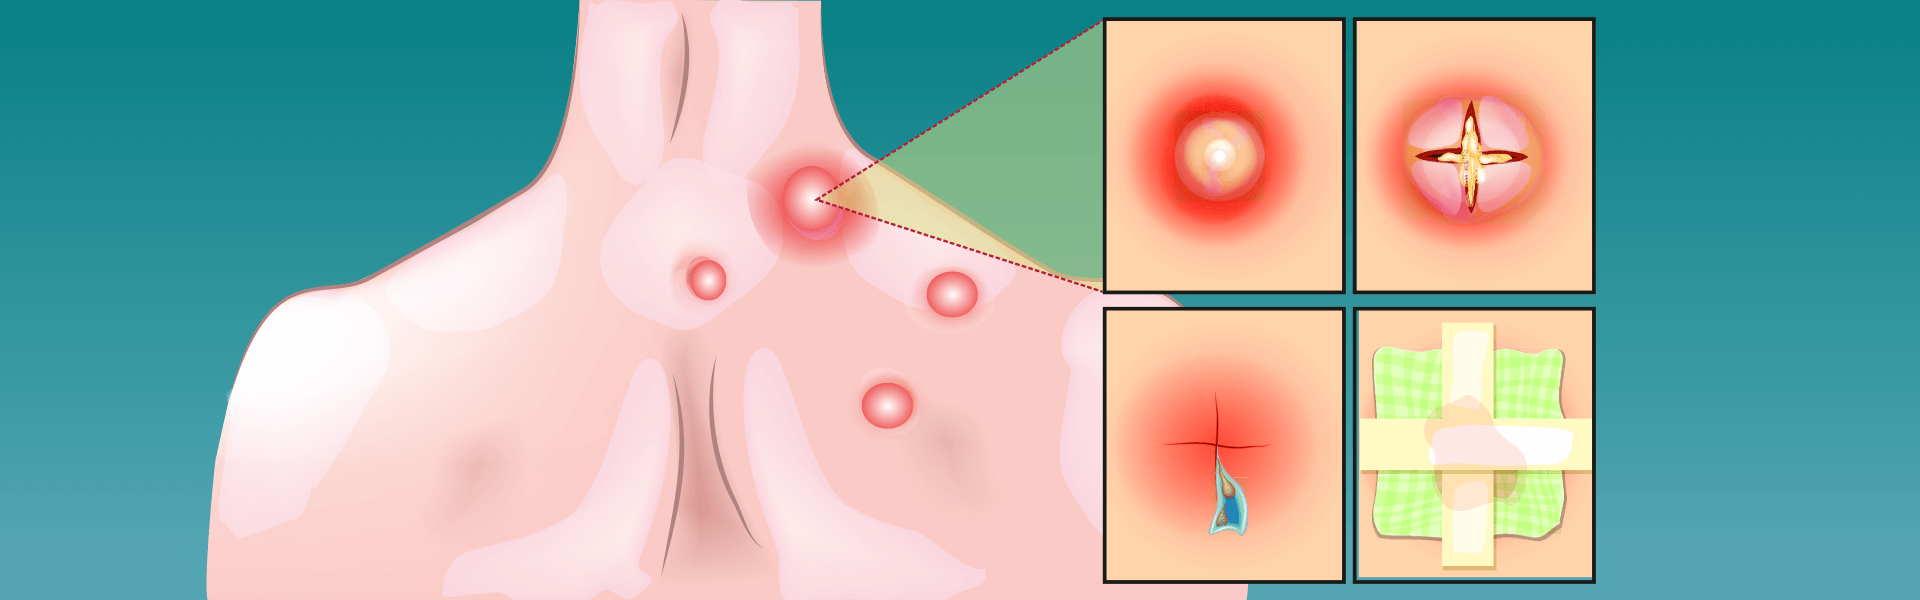 Skin Abscess | Manipal Hospitals India